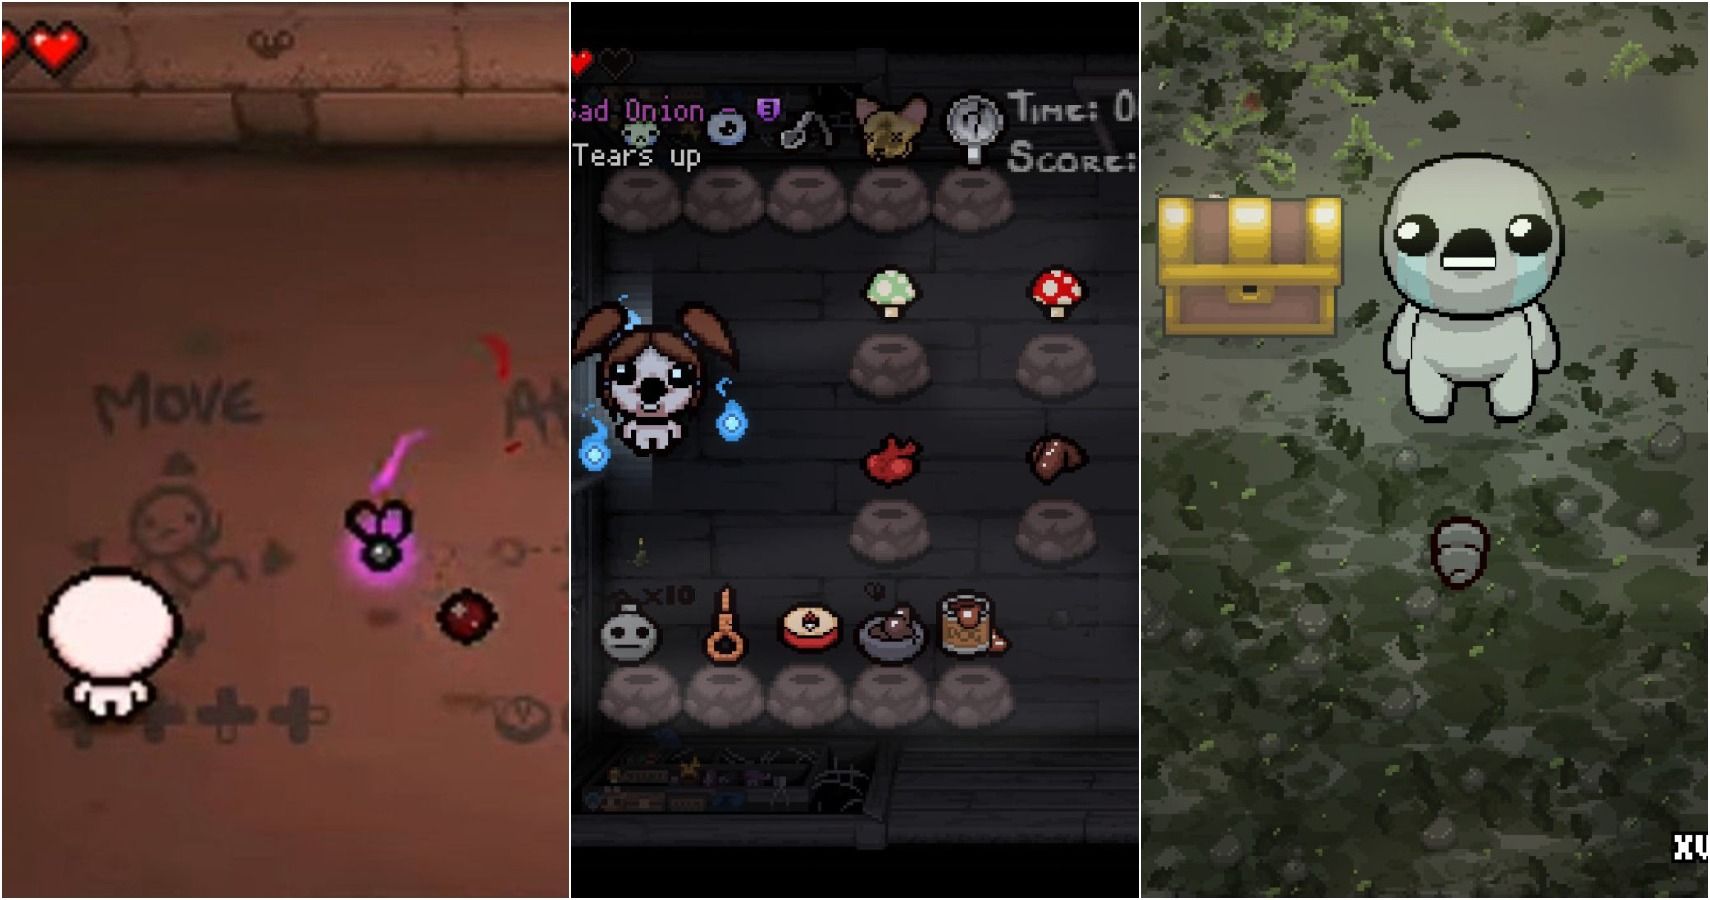 the binding of isaac repentance items